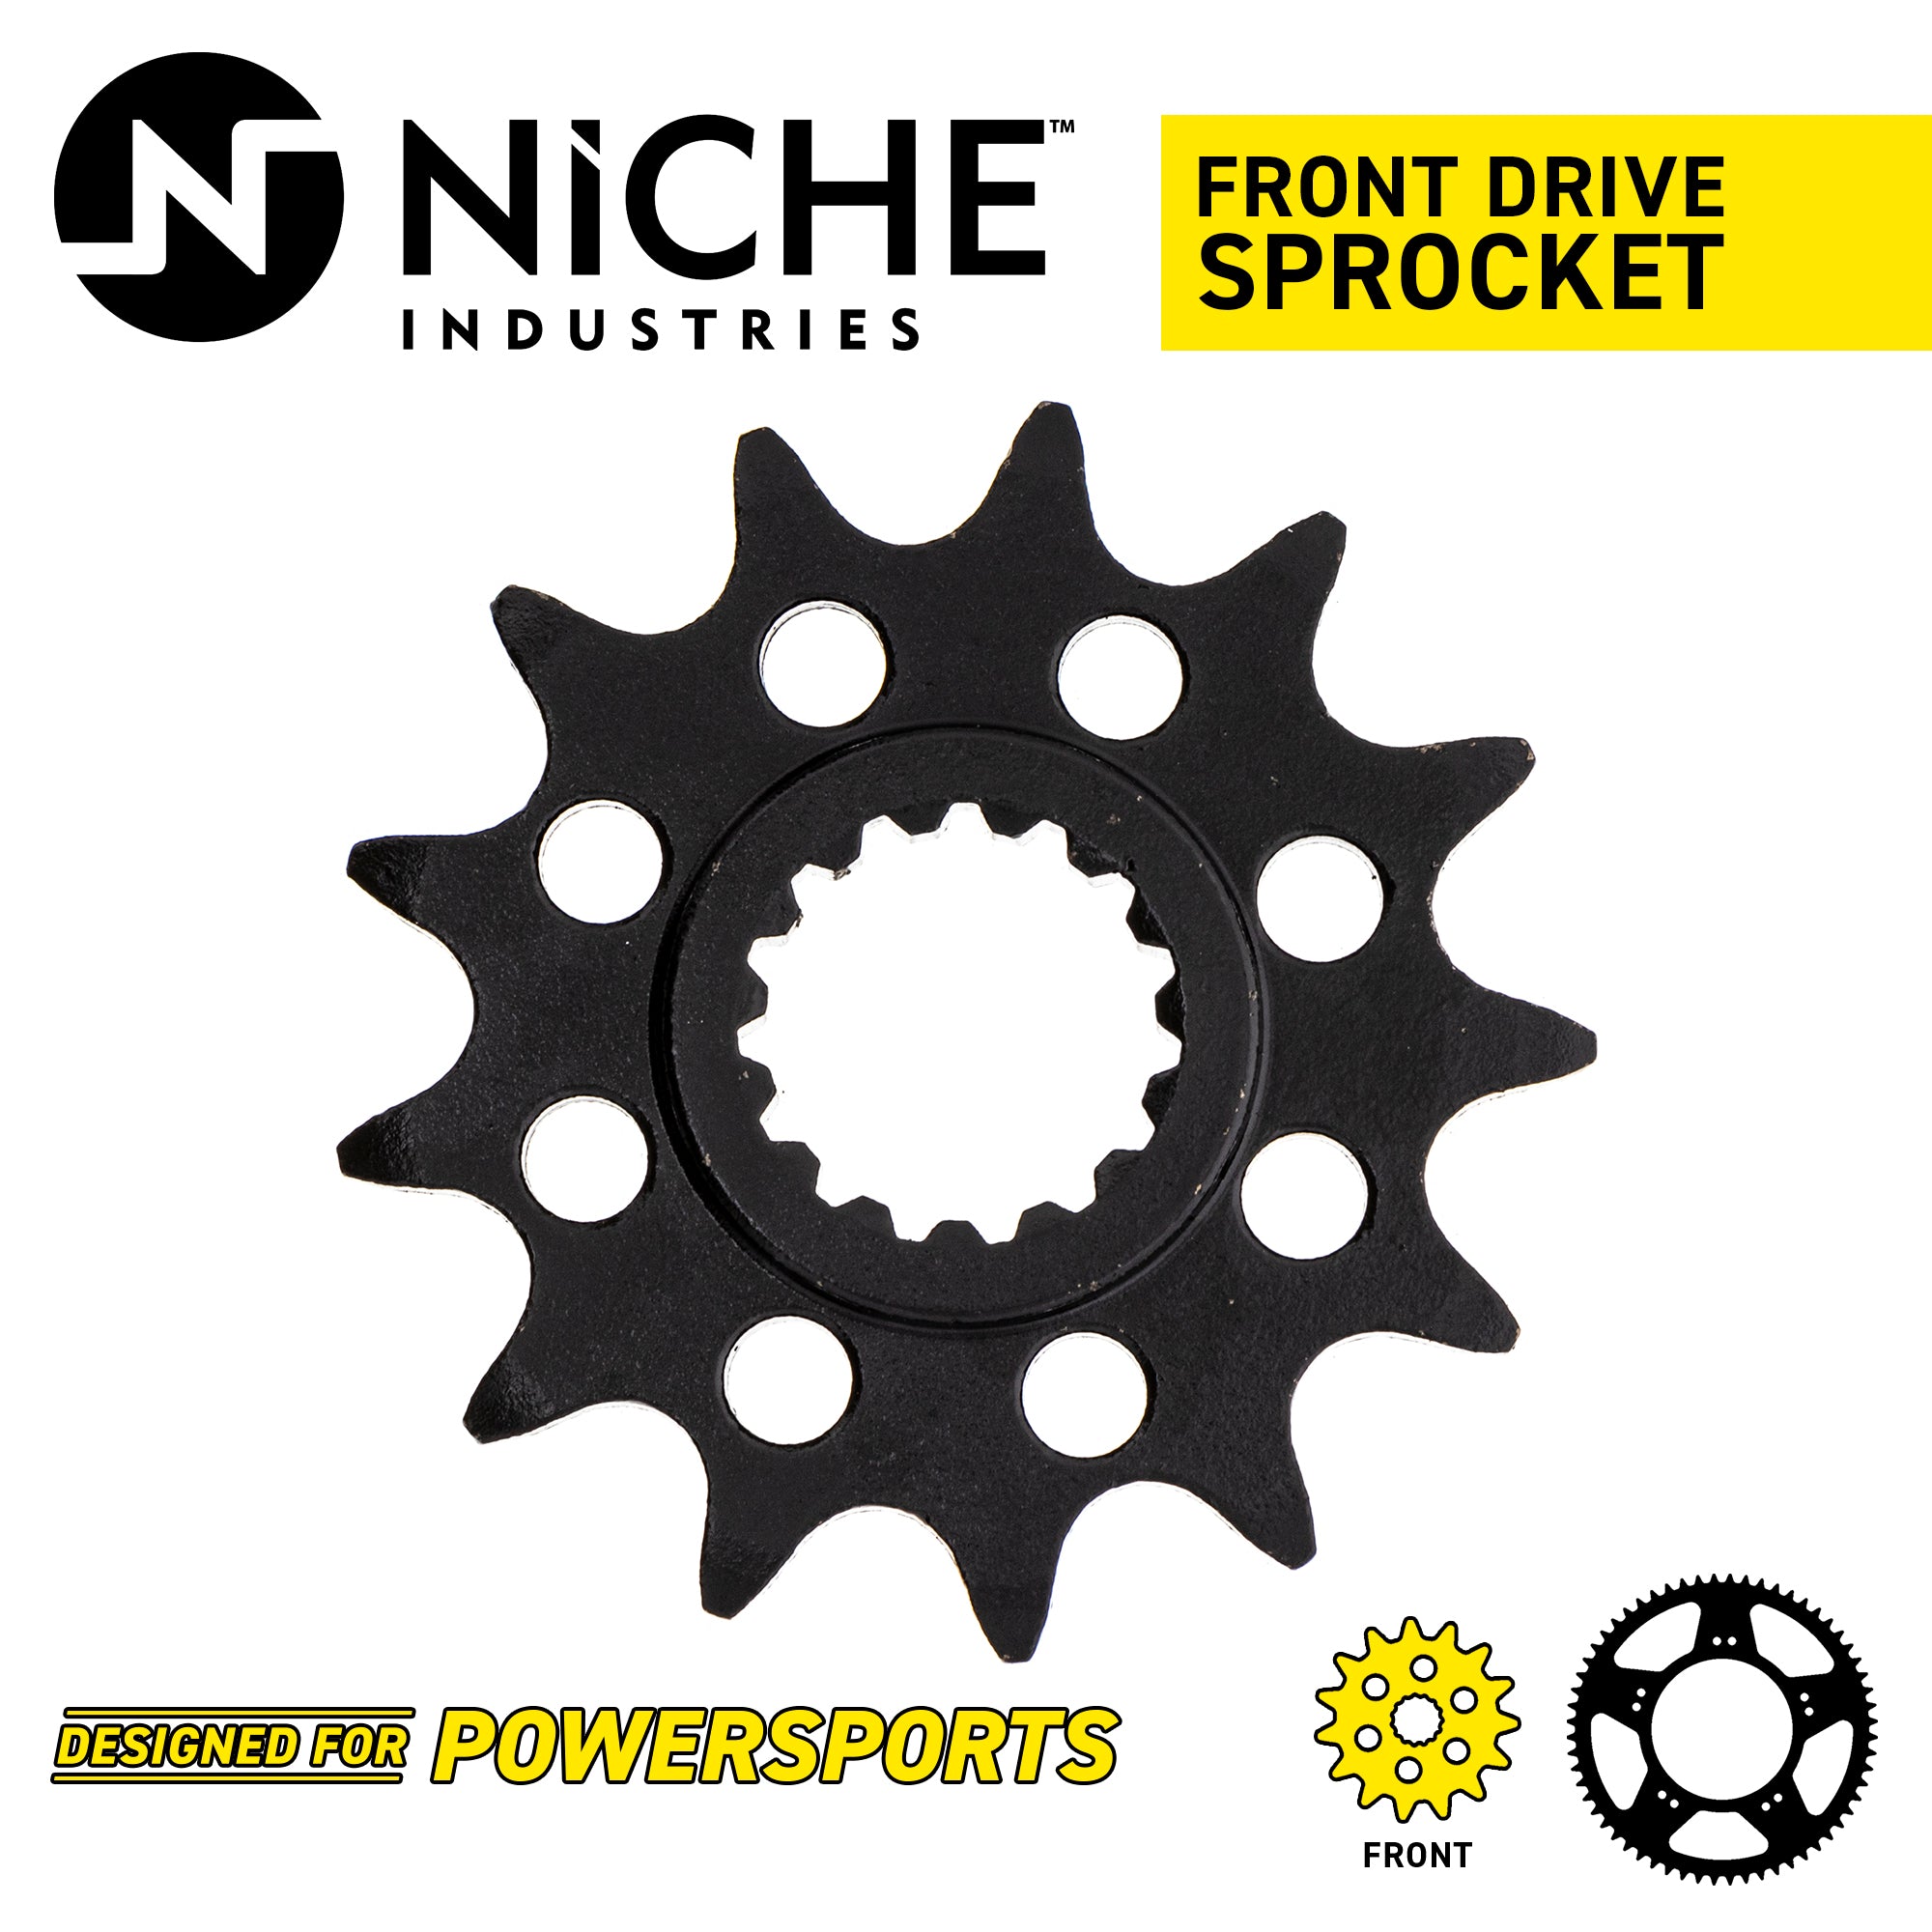 Drive Sprockets & Chain Kit For BETA MK1004645